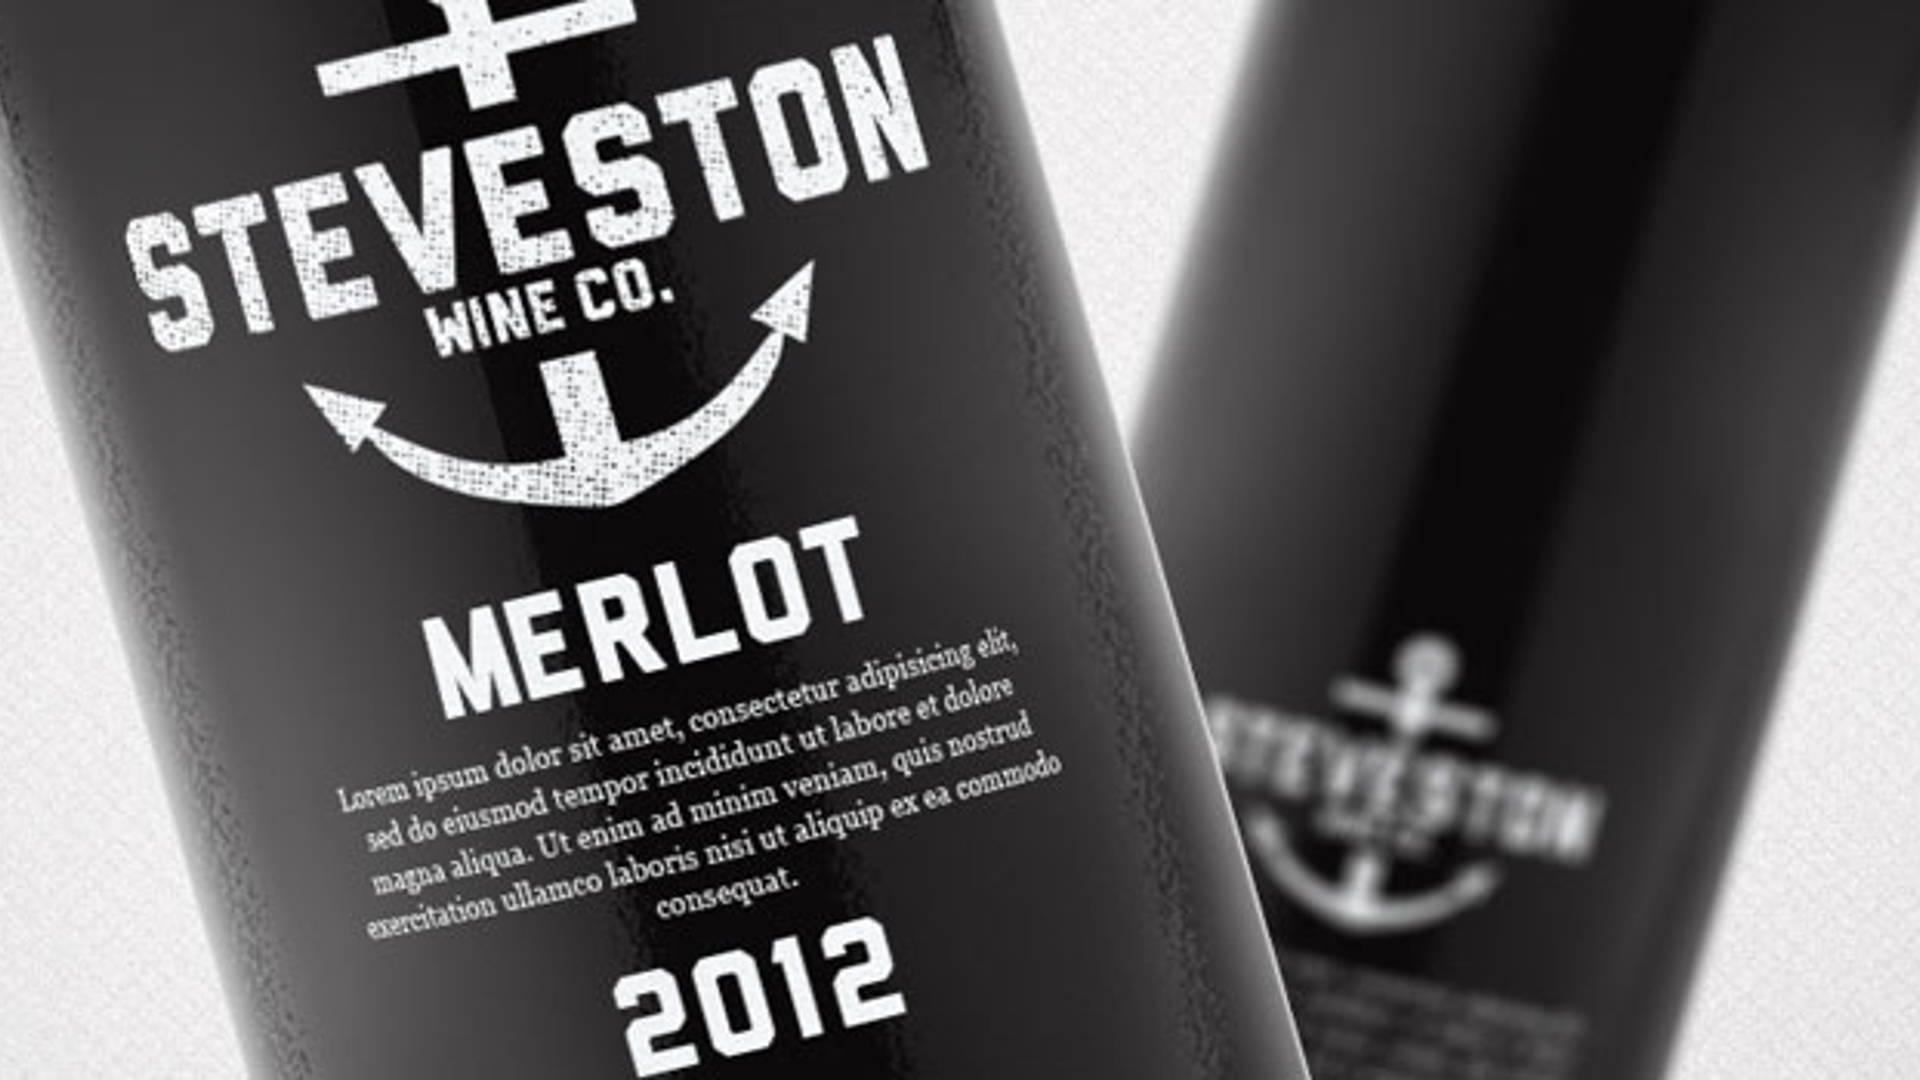 Featured image for Steveston Wine Co. Concept